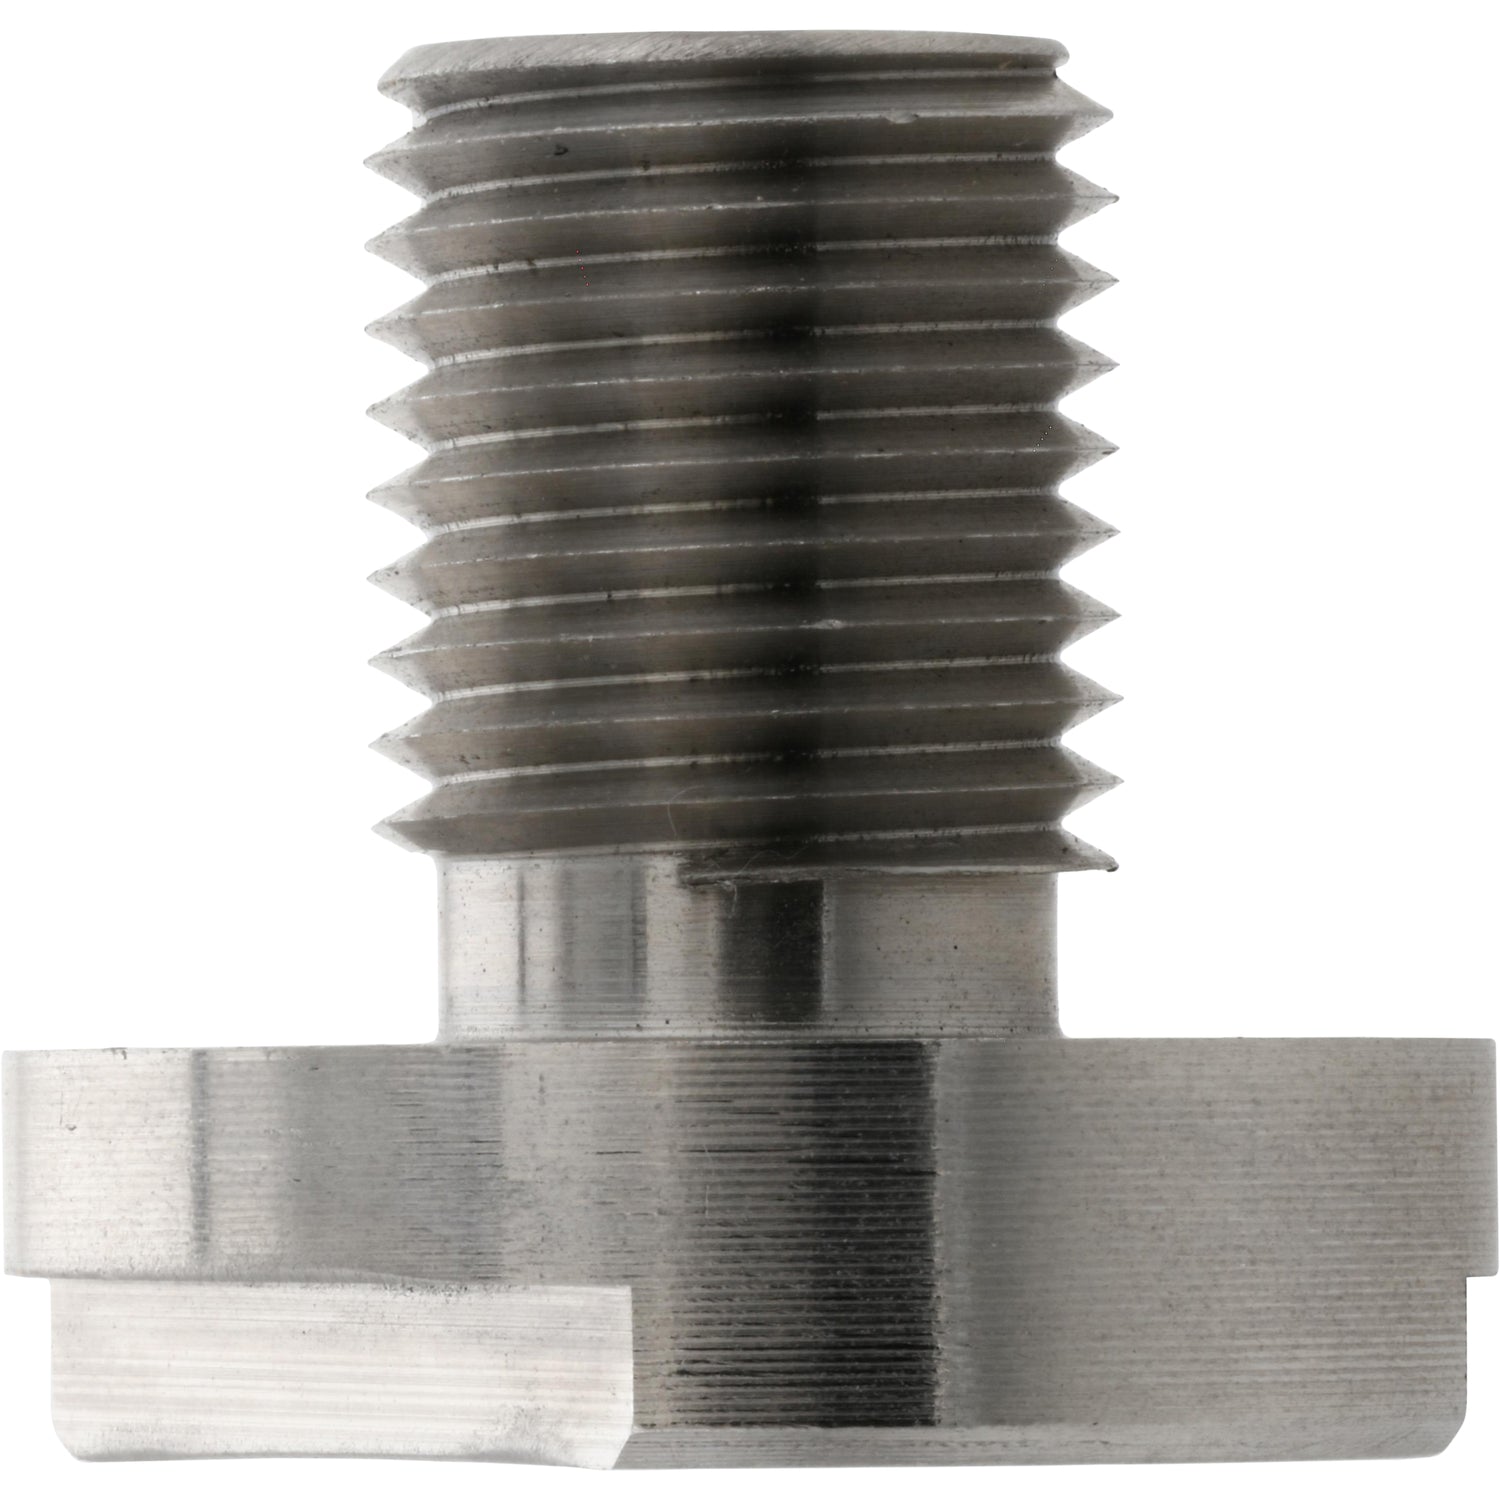 Stainless steel threaded screw with machined flats on white background. 